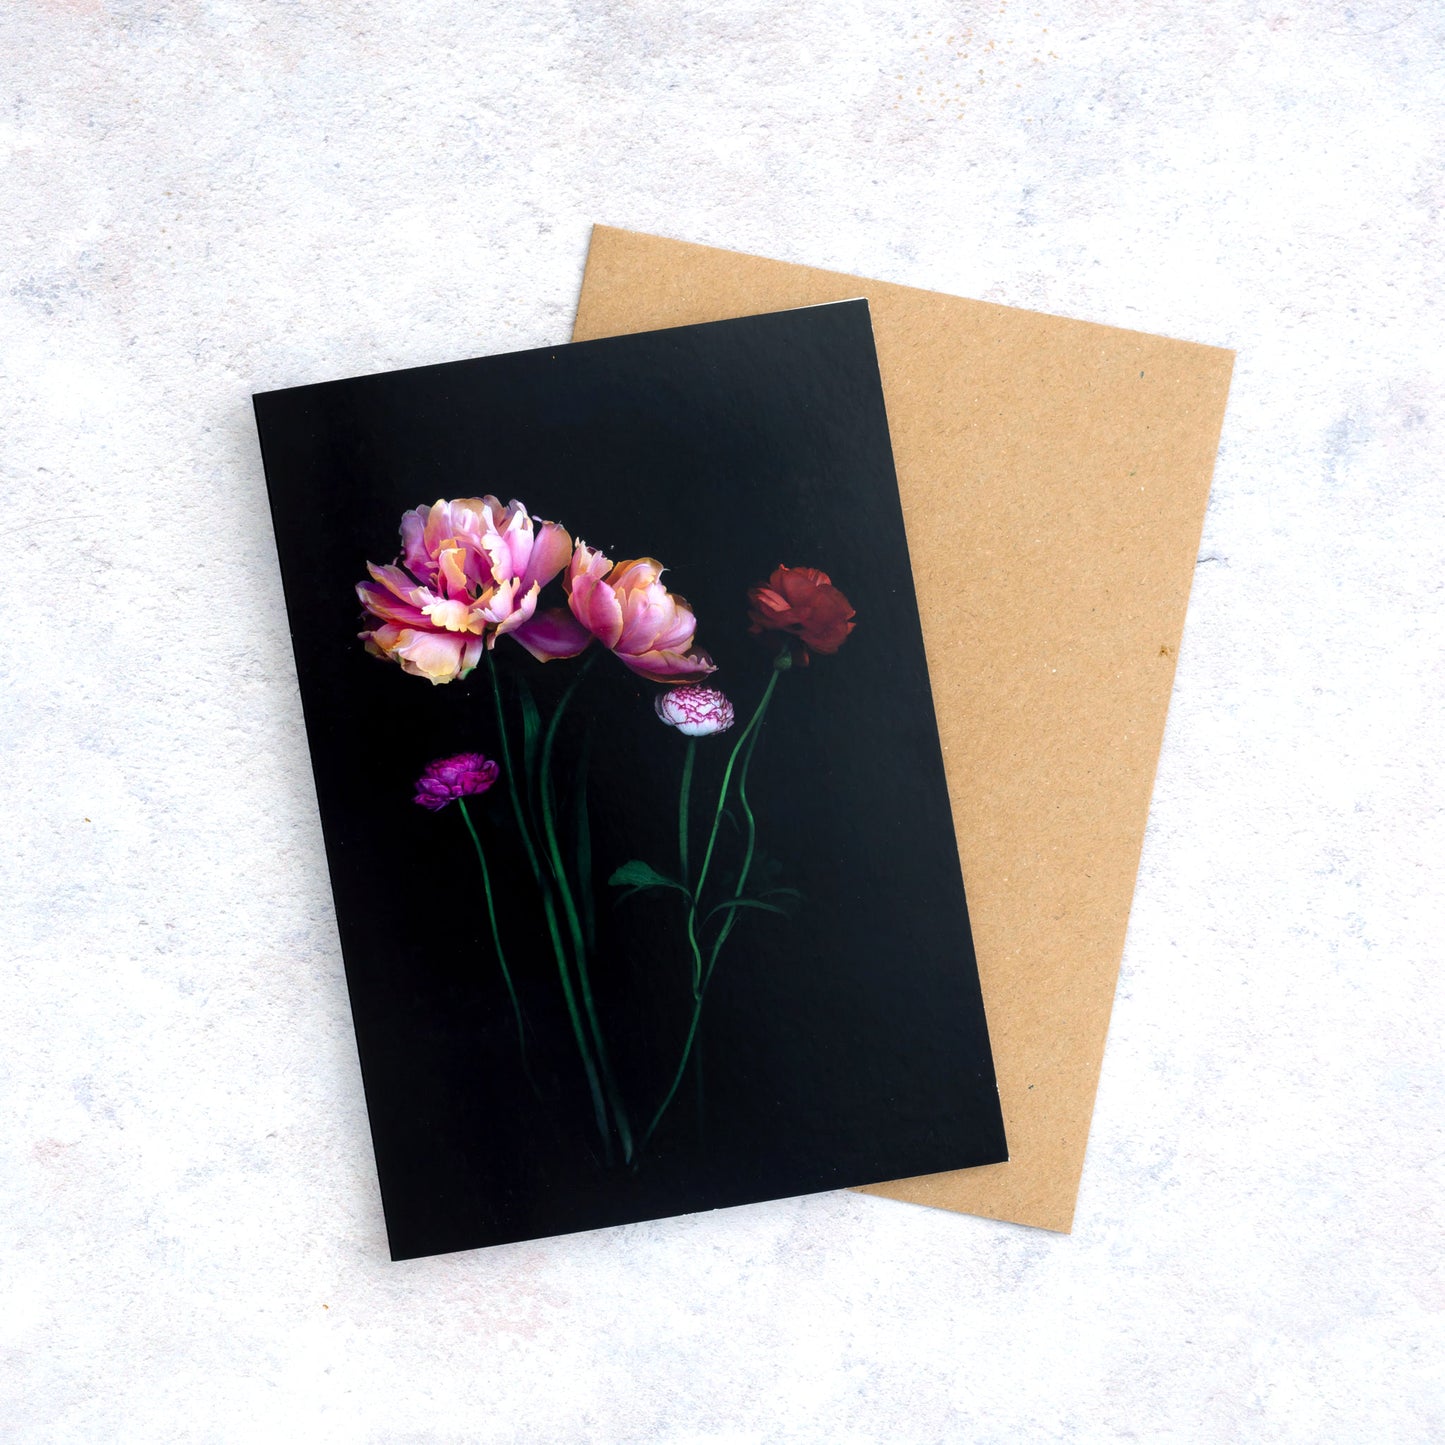 Botanical greeting card with Tulips and Ranunculus  photographed on a black background.